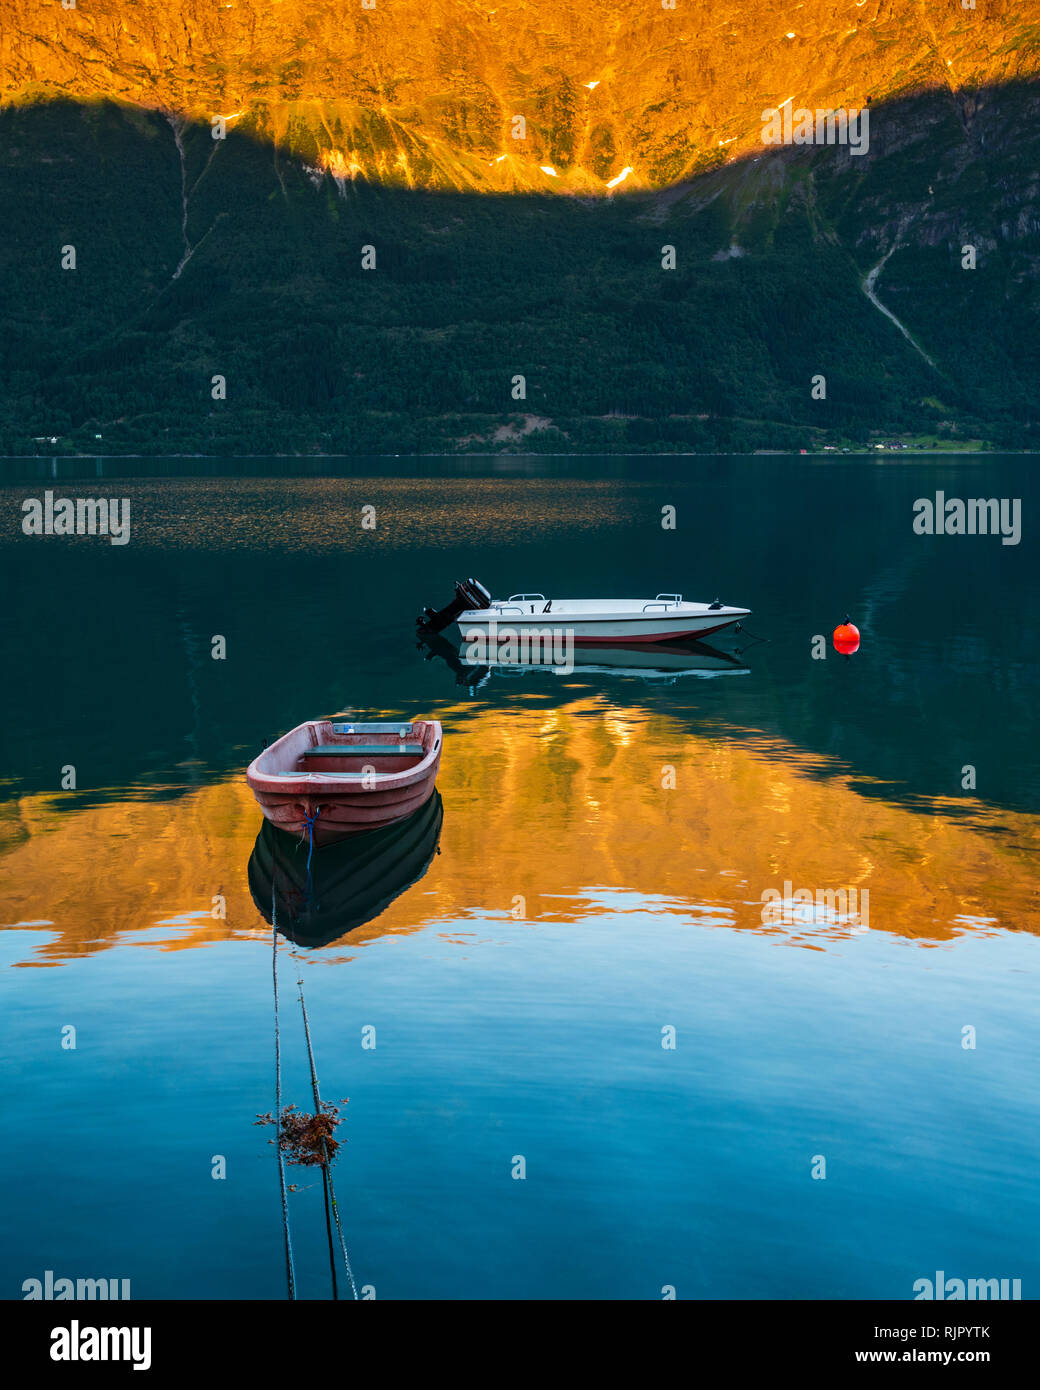 Boats floating on still lake at sunset, Lusterfjord, Norway, Europe Stock Photo